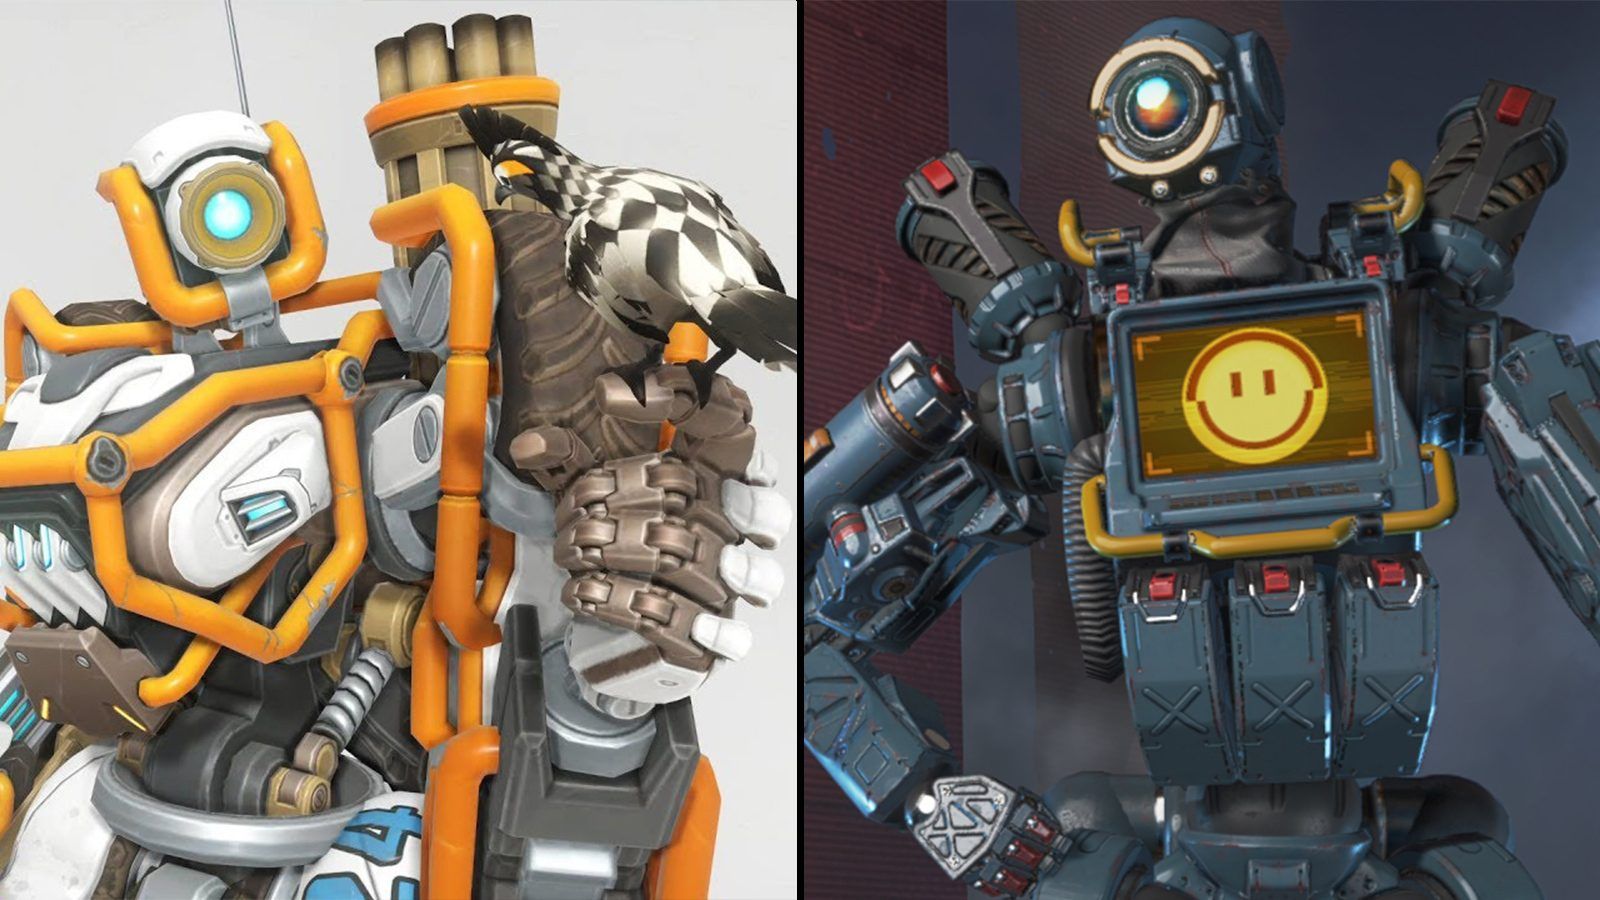 Apex Legends' Pathfinder includes a great Overwatch reference